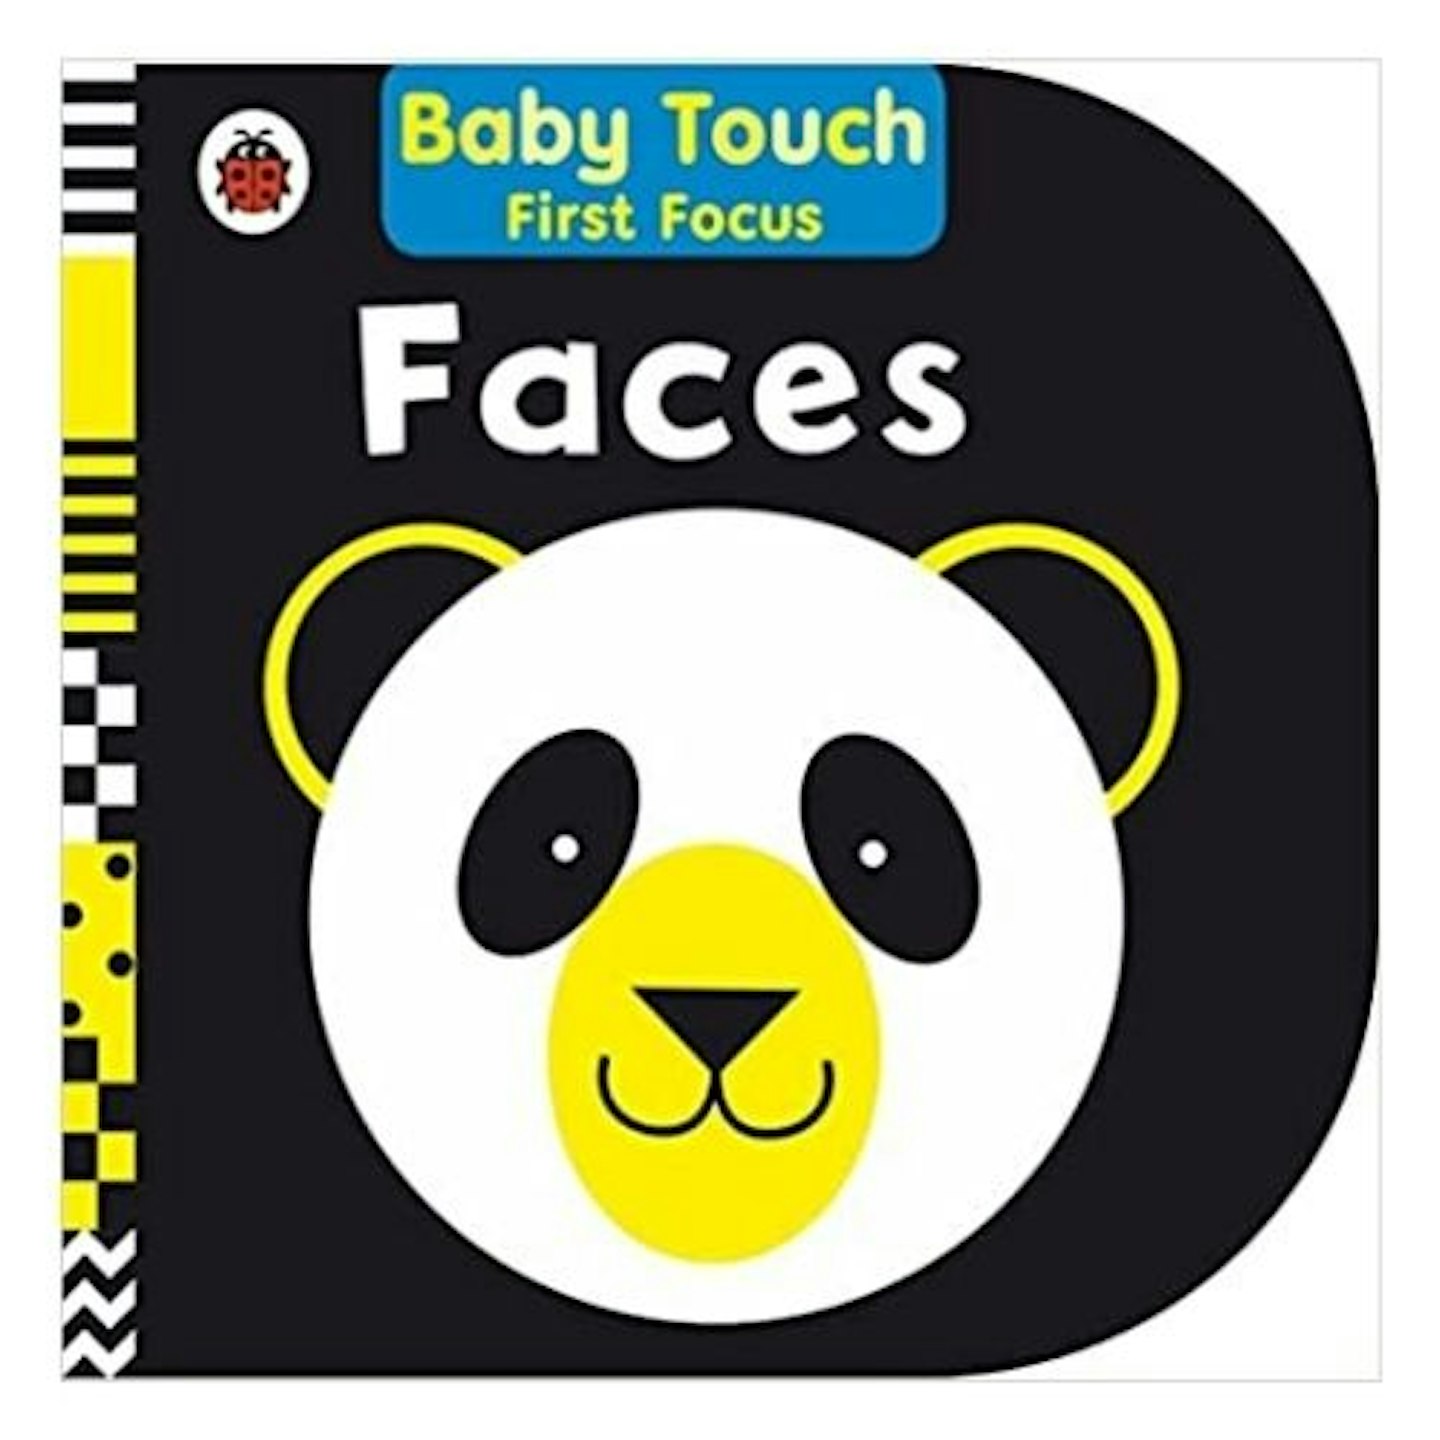 Faces: Baby Touch First Focus by Ladybird